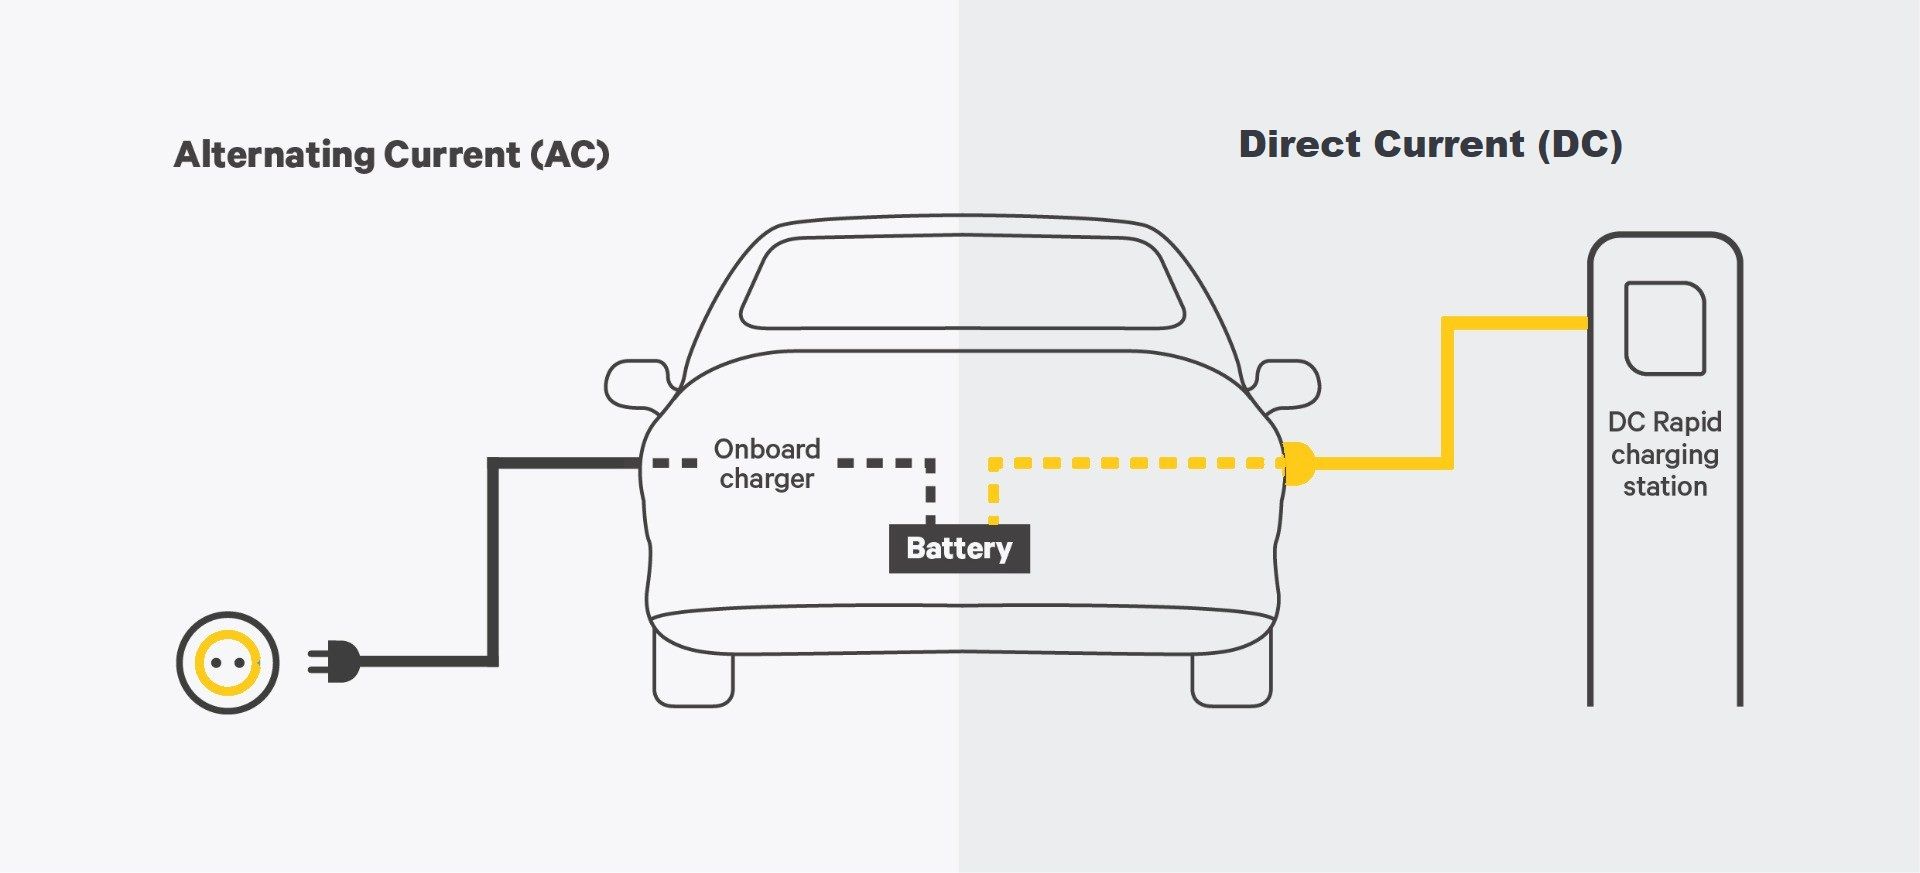 Differences between AC and DC charging